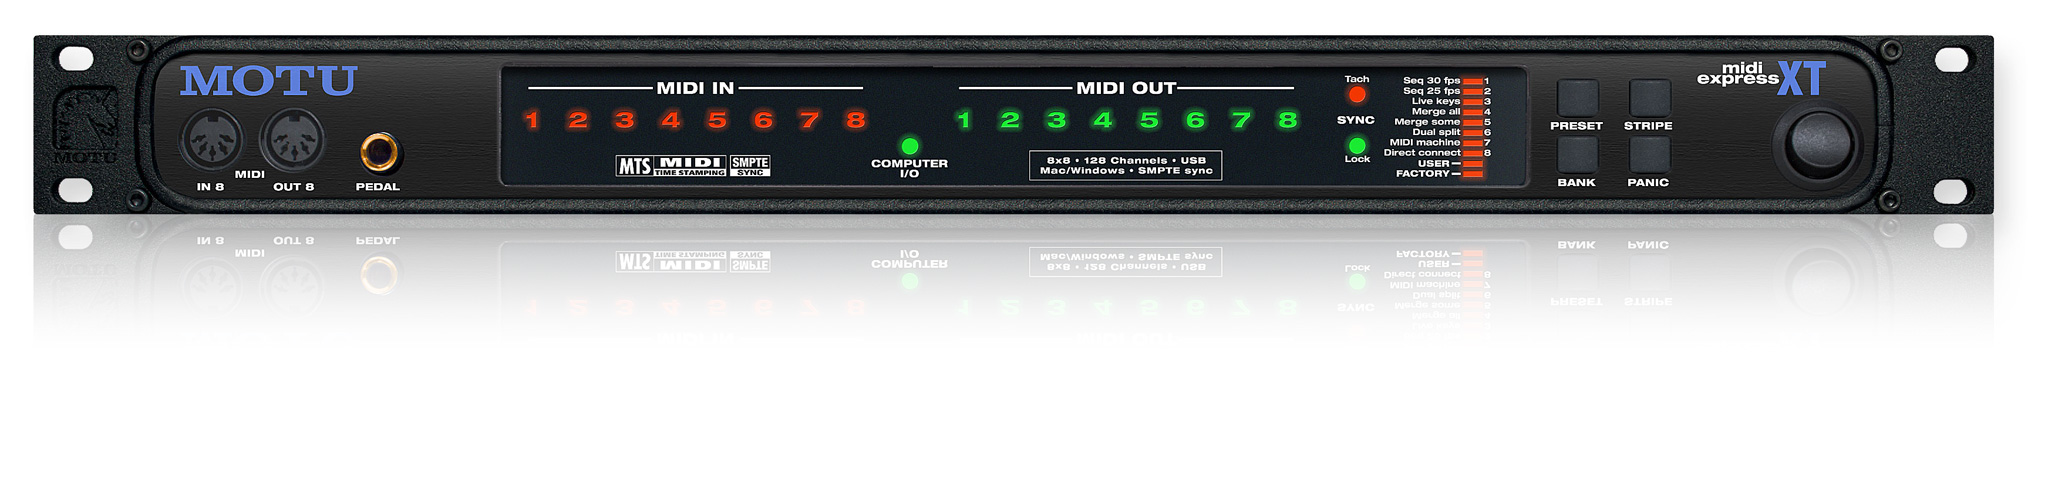 midi express xt overview midi express xt is an 8 in 8 out midi ...